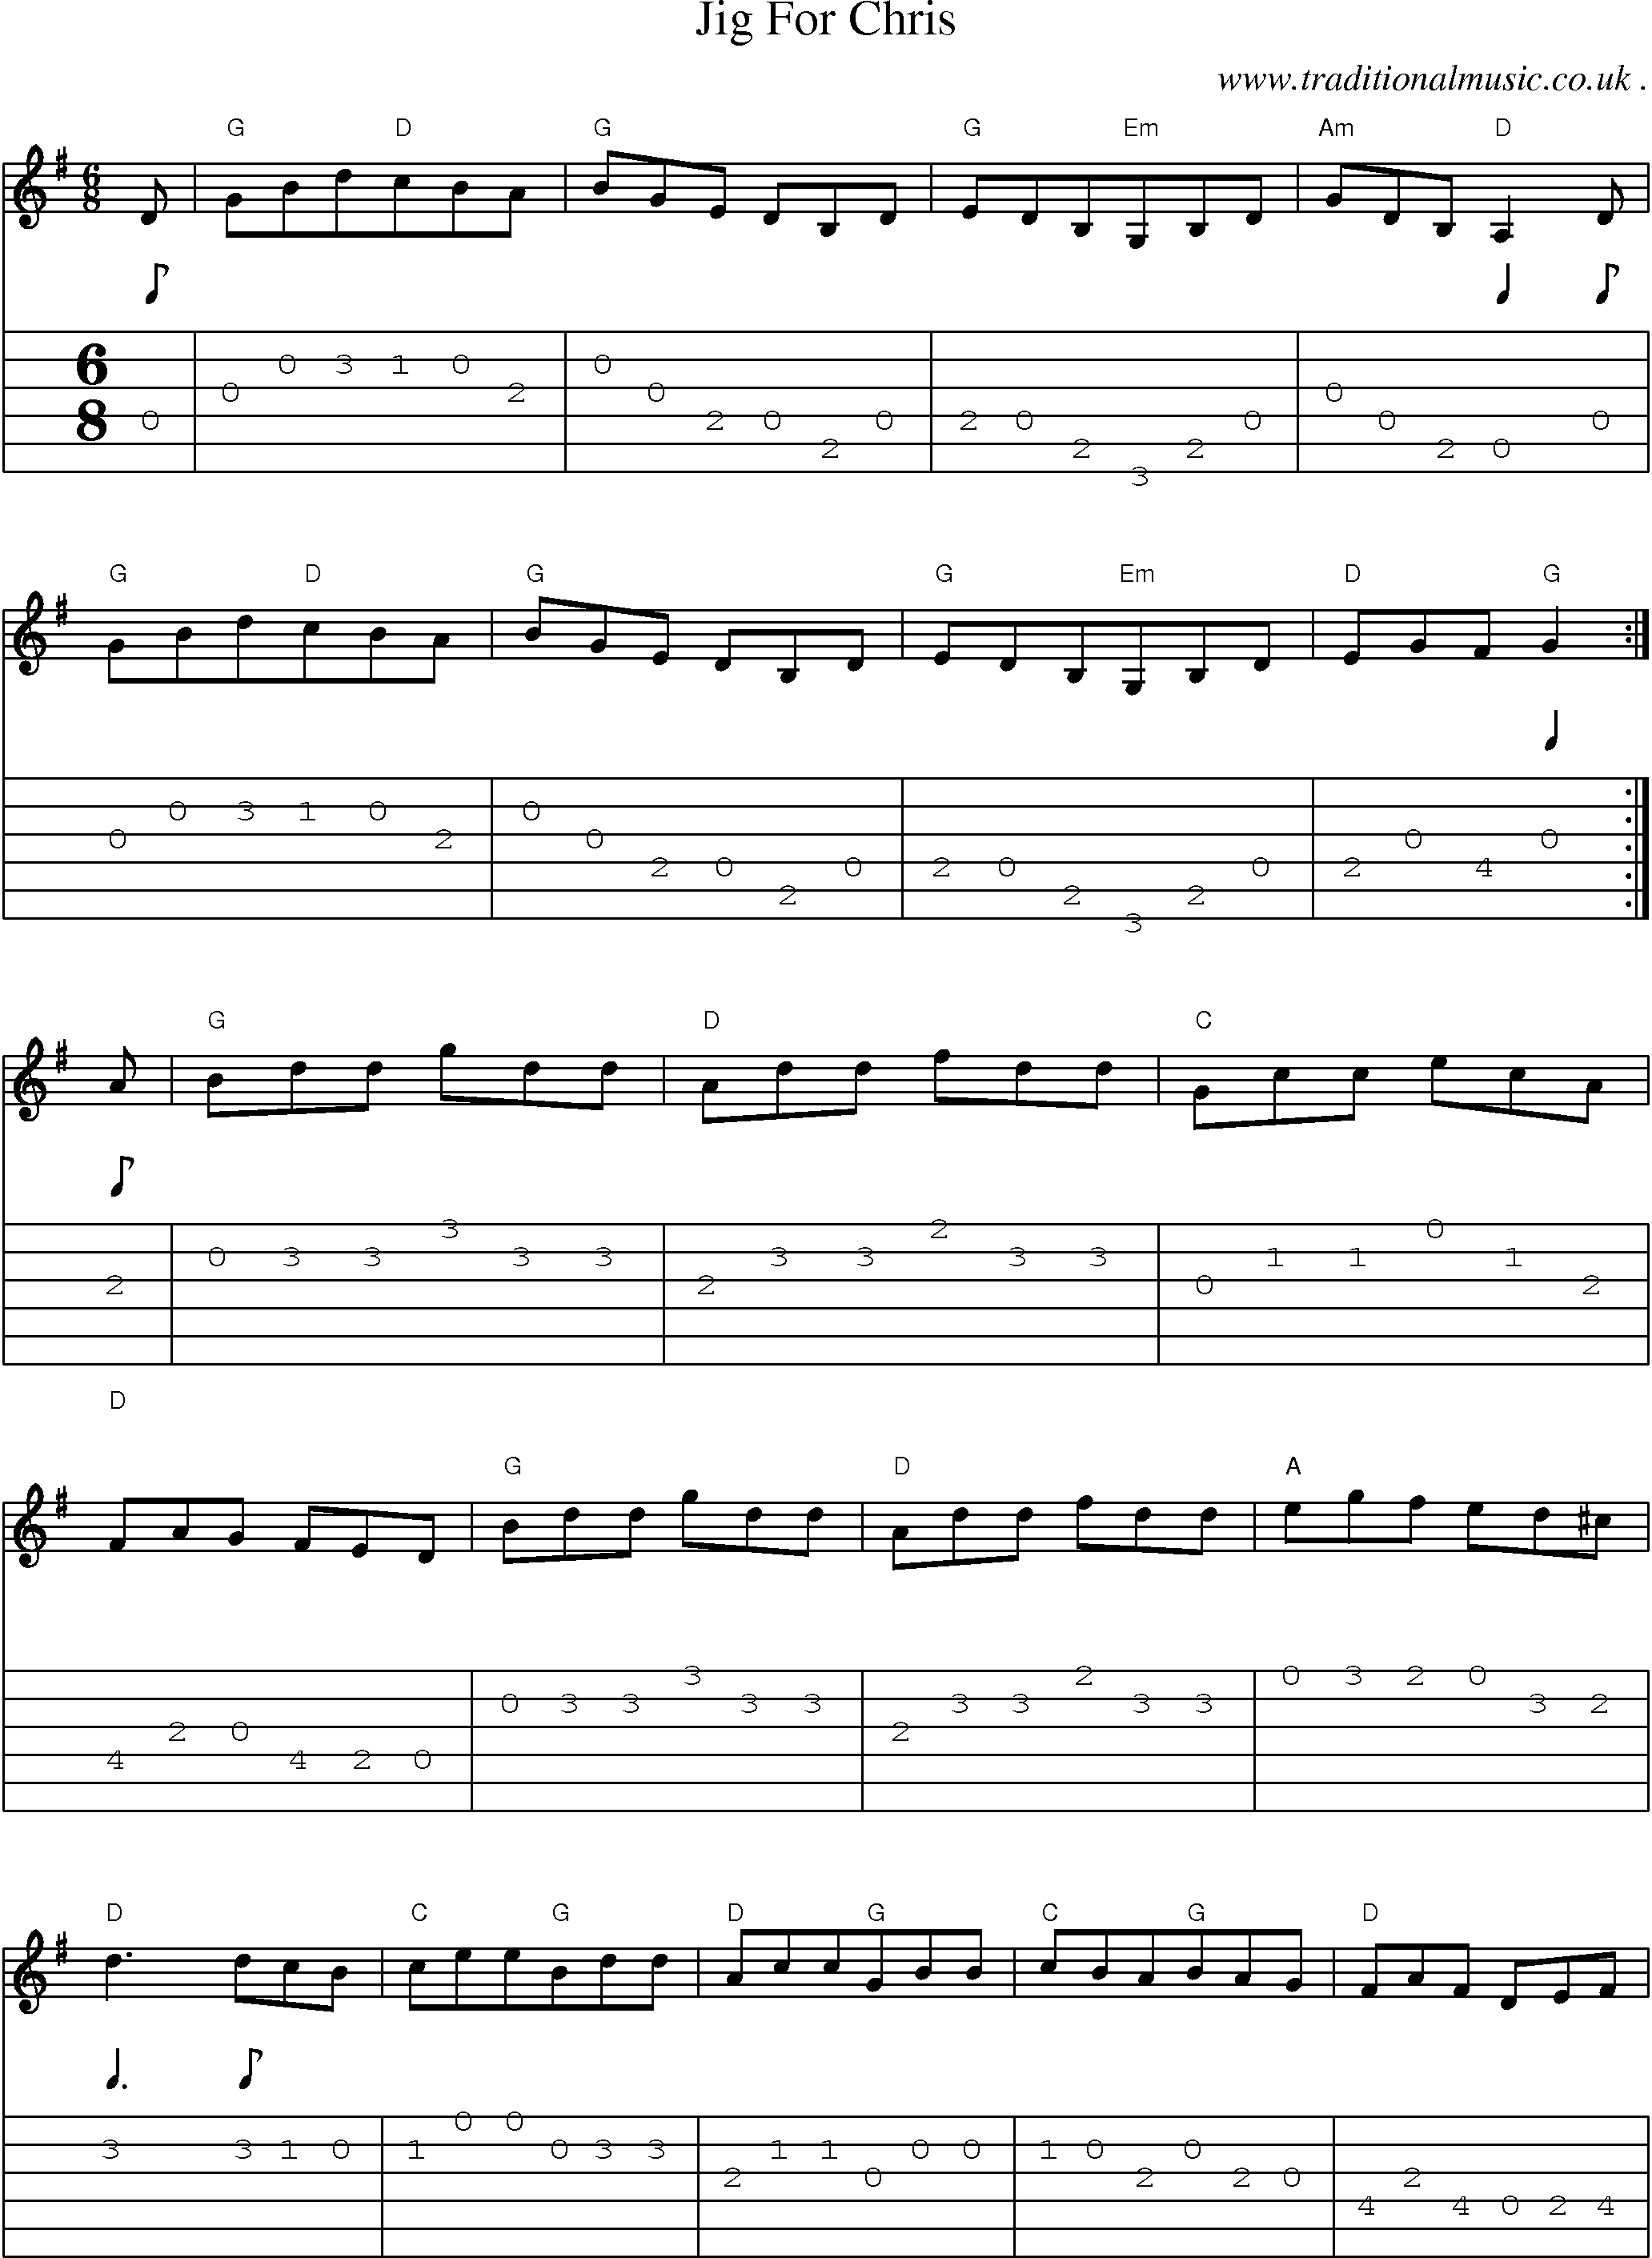 Sheet-Music and Guitar Tabs for Jig For Chris